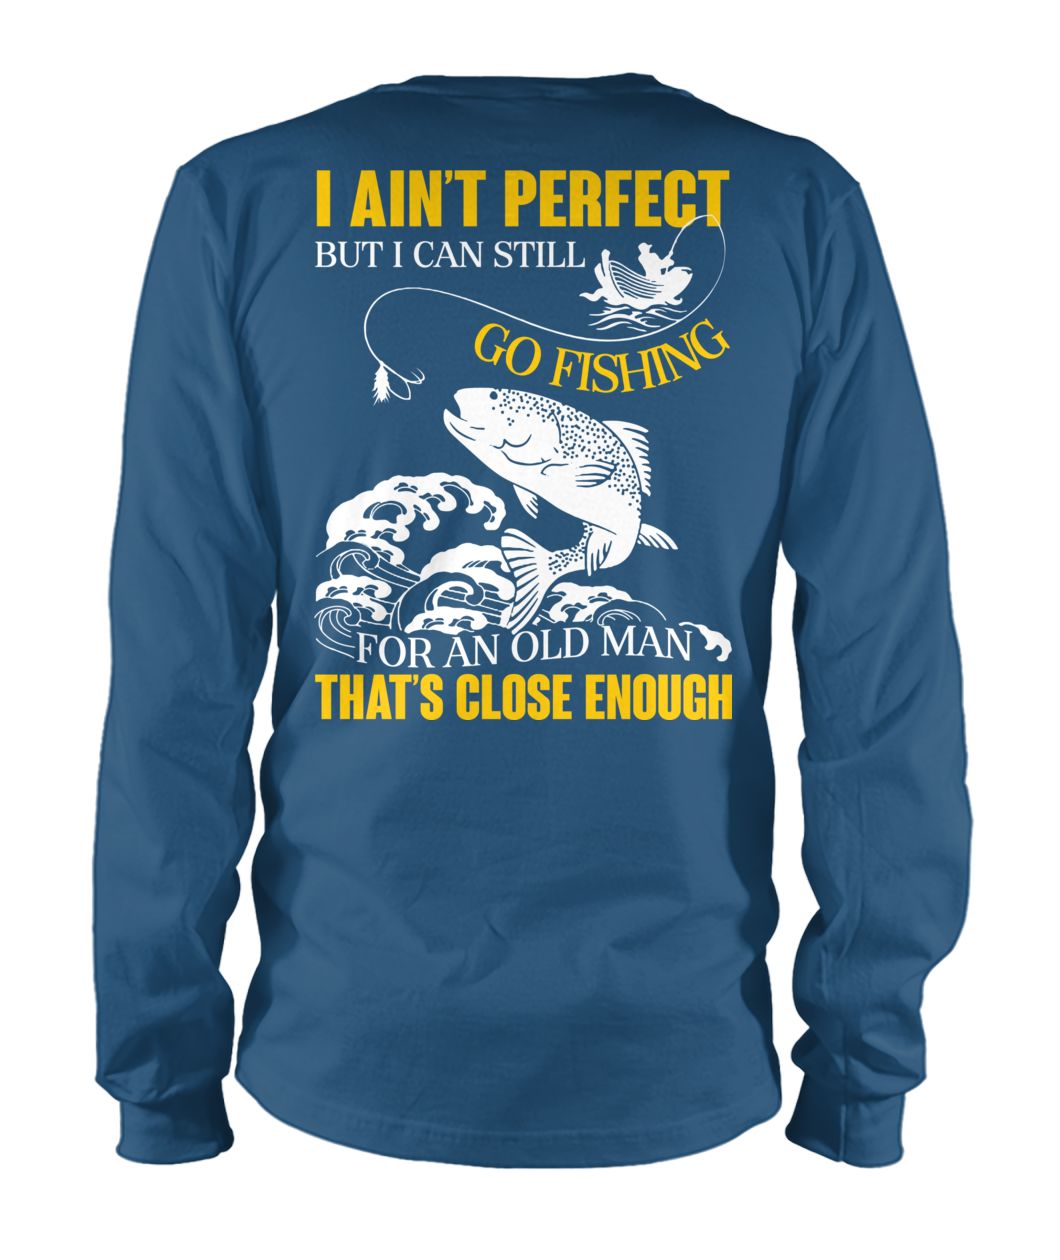 I ain't perfect but I can still go fishing for an old man that's close enough unisex long sleeve